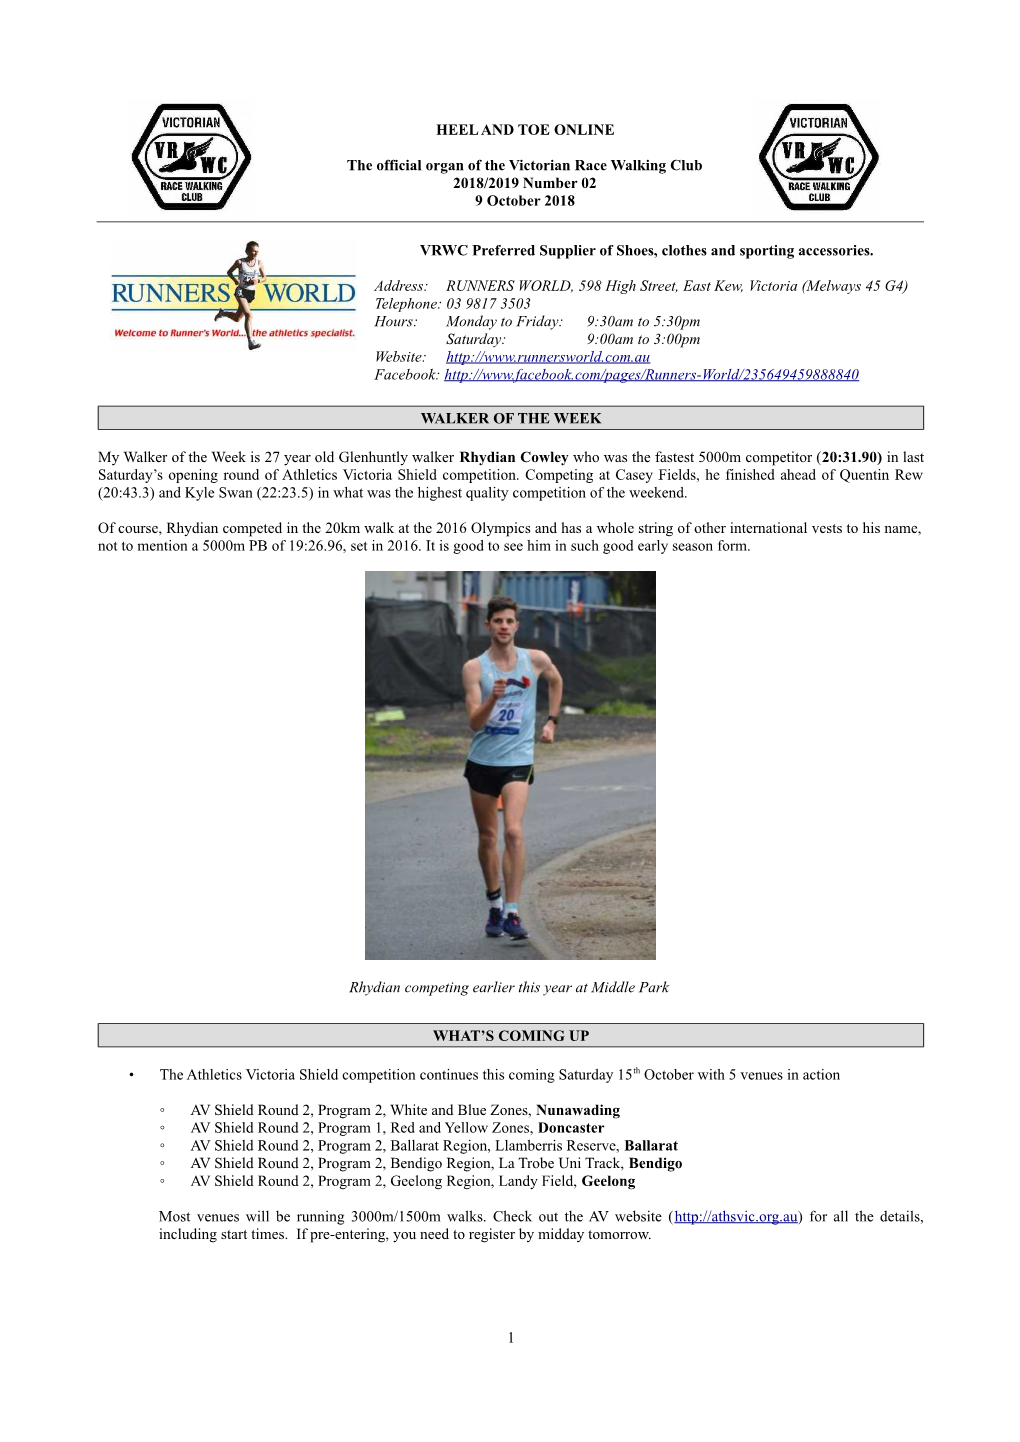 HEEL and TOE ONLINE the Official Organ of the Victorian Race Walking Club 2018/2019 Number 02 9 October 2018 VRWC Preferred Supp